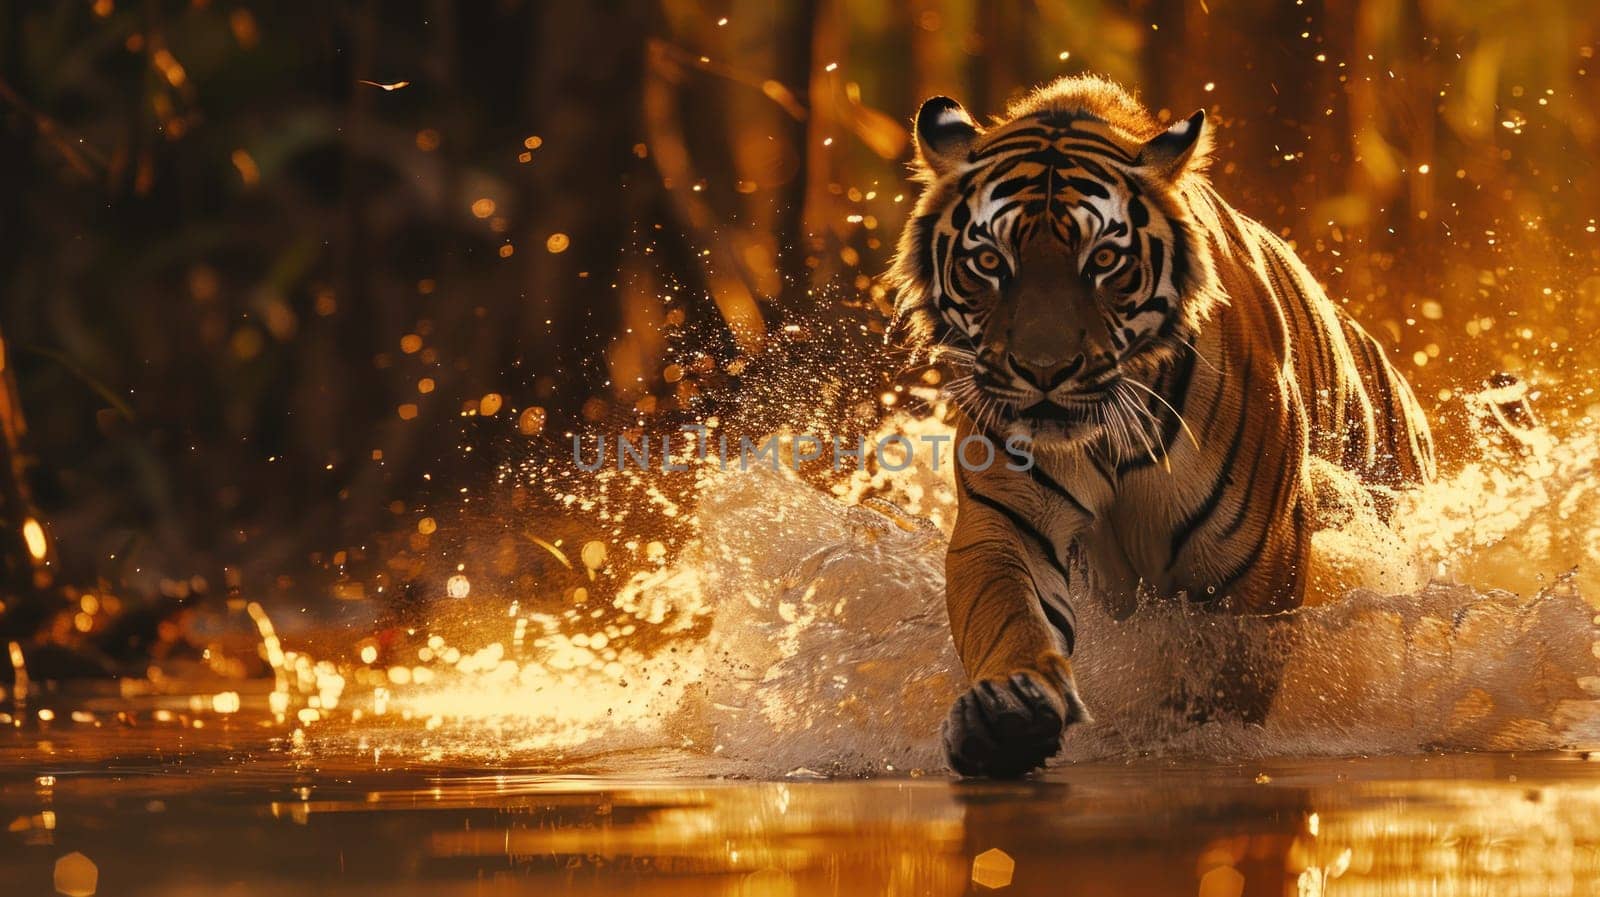 A tiger is running through the water, leaving a trail of splashes behind it. The scene is dynamic and full of energy, with the tiger's movements creating a sense of motion and excitement